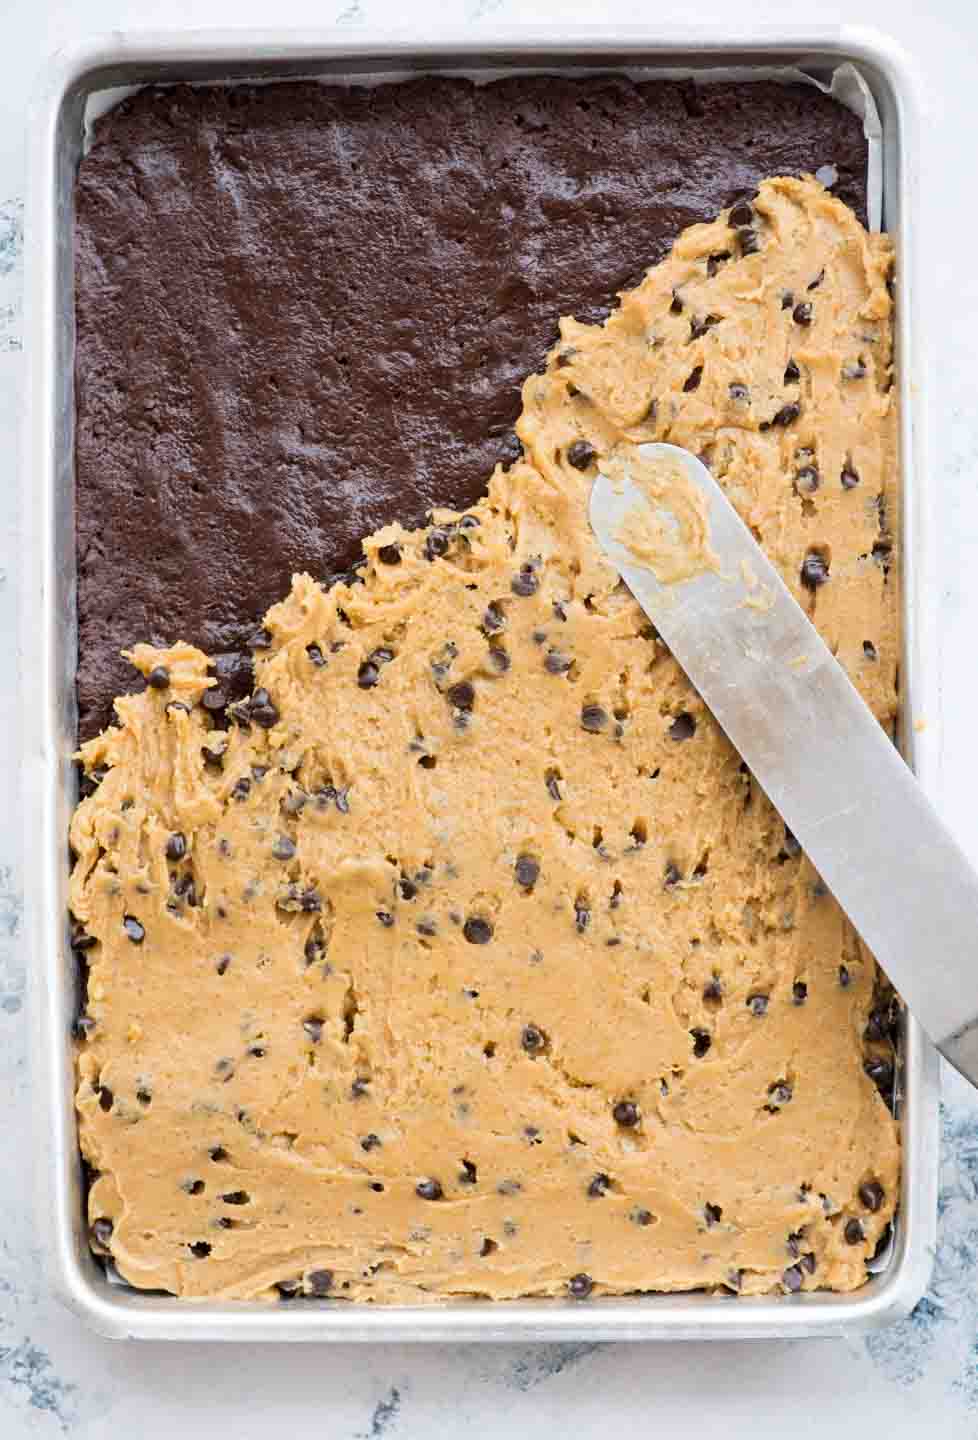 Double chocolate chip cookie bars with a fudgy chocolatey bottom are soft, chewy and made in a sheet pan. These Chocolate Chip Cookie Bars are made with single cookie dough (no separate dough for both the layers).